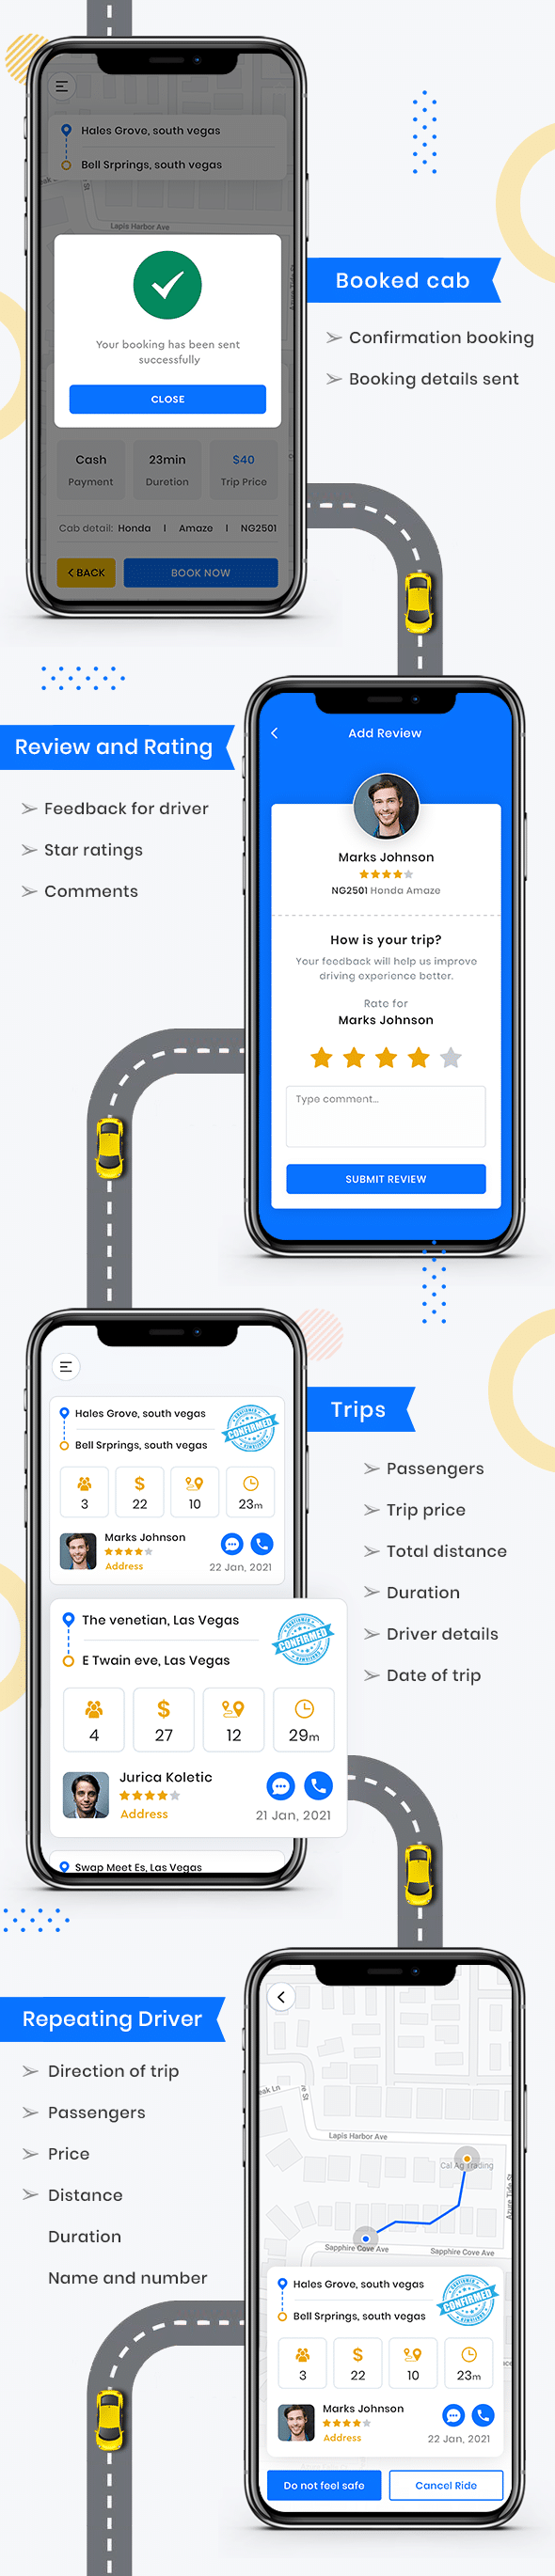 CabME - Flutter Complete Taxi app | Taxi Booking Solution - 8